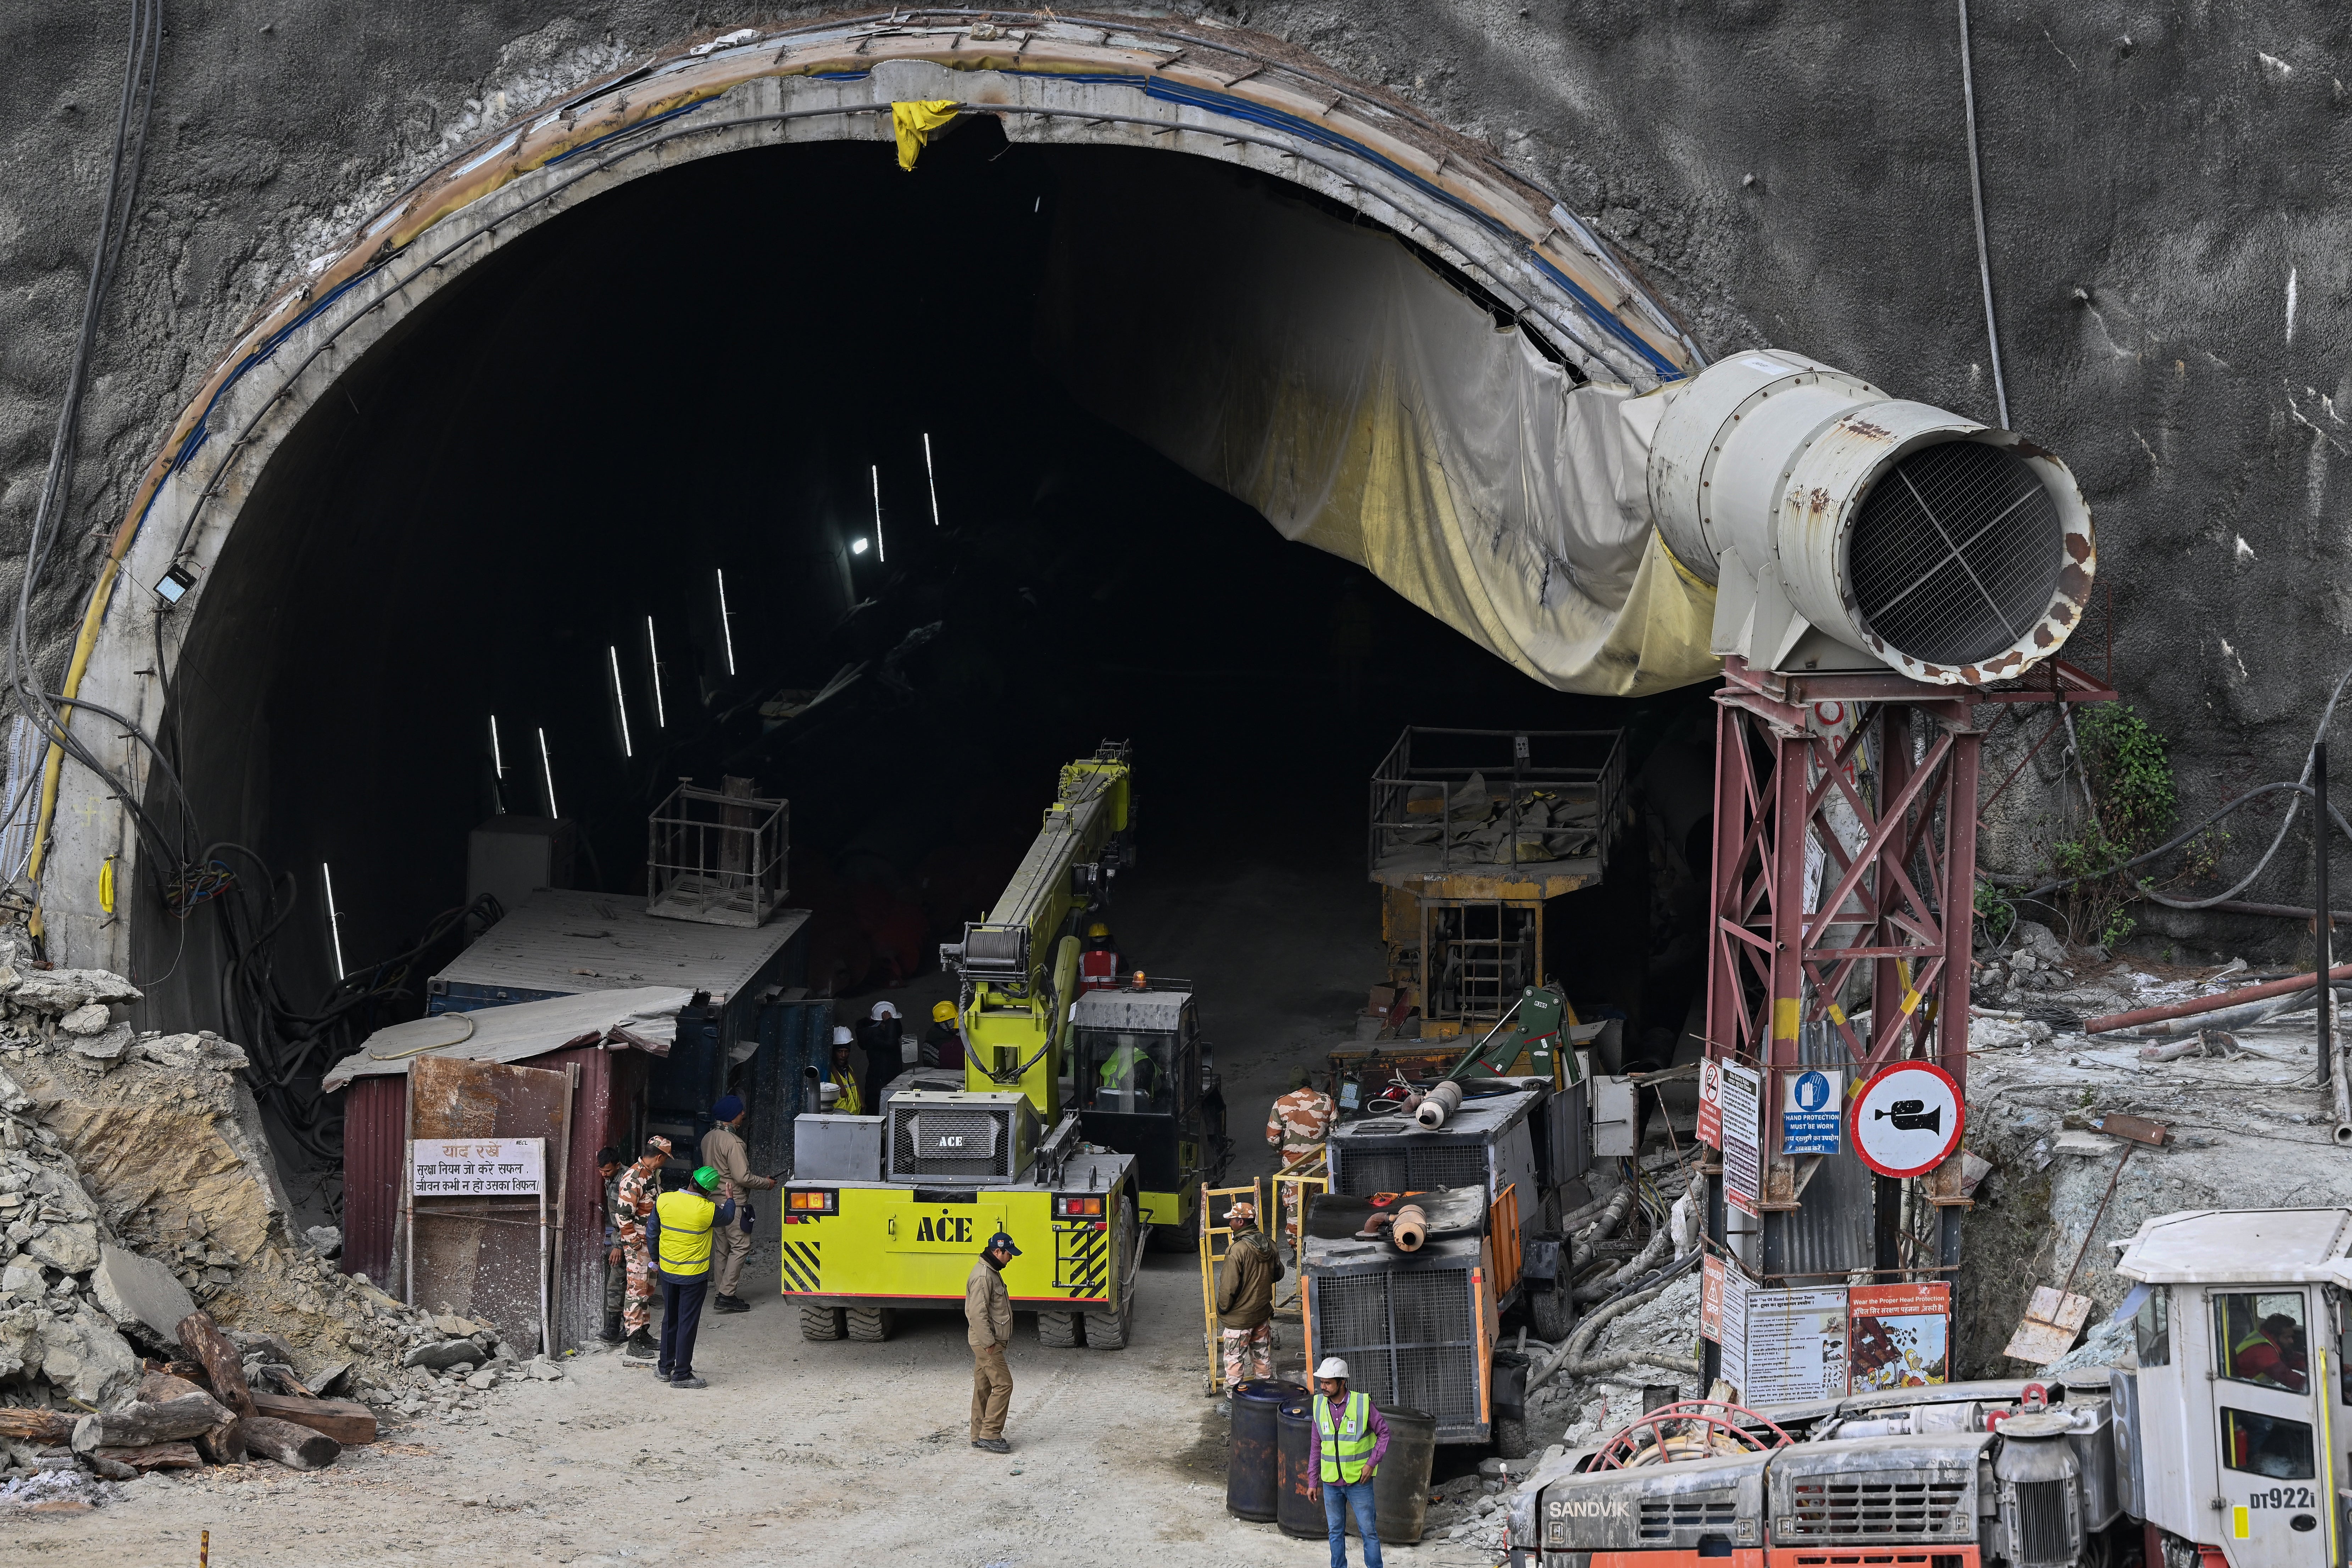 Rescue personnel work at the collapsed under construction Silkyara tunnel